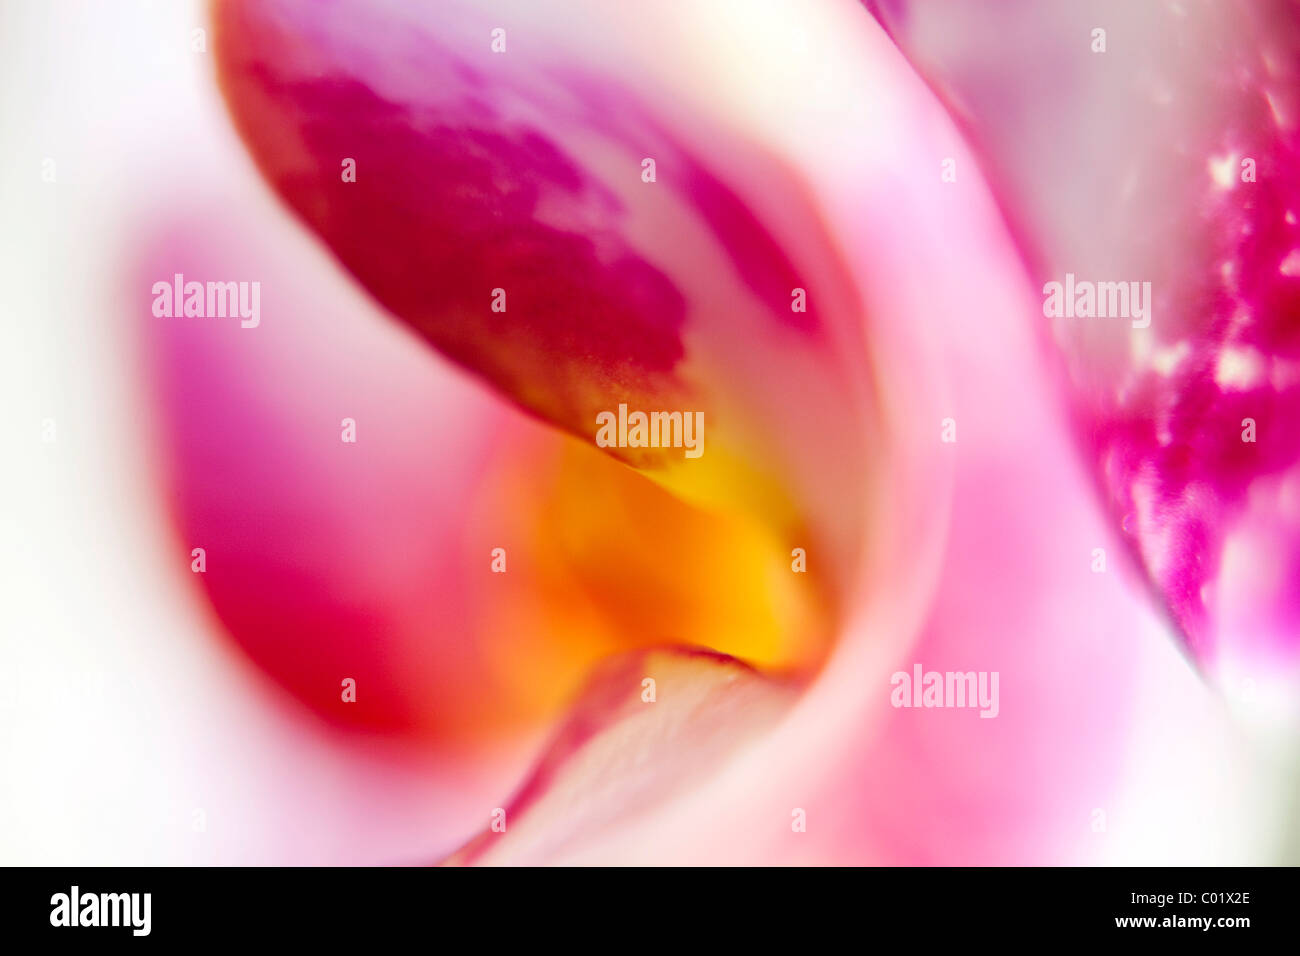 Abstract flower of an orchid (Orchidaceae) Stock Photo